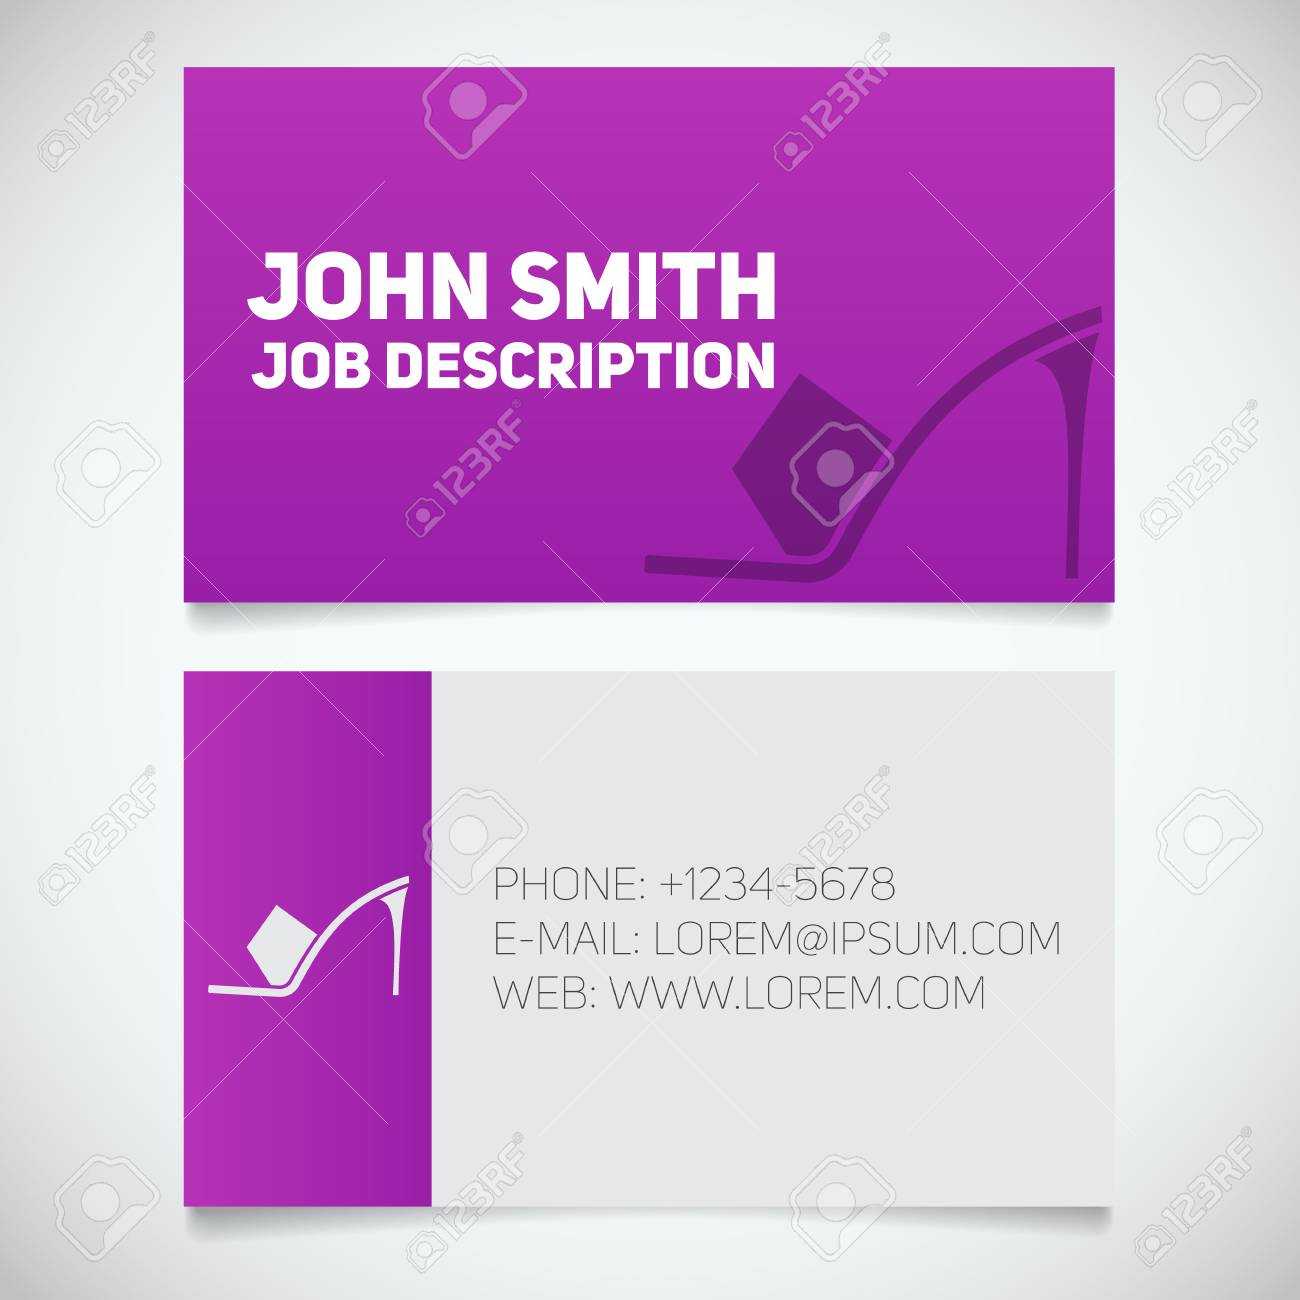 Business Card Print Template With High Heel Shoe Logo. Manager Inside High Heel Template For Cards